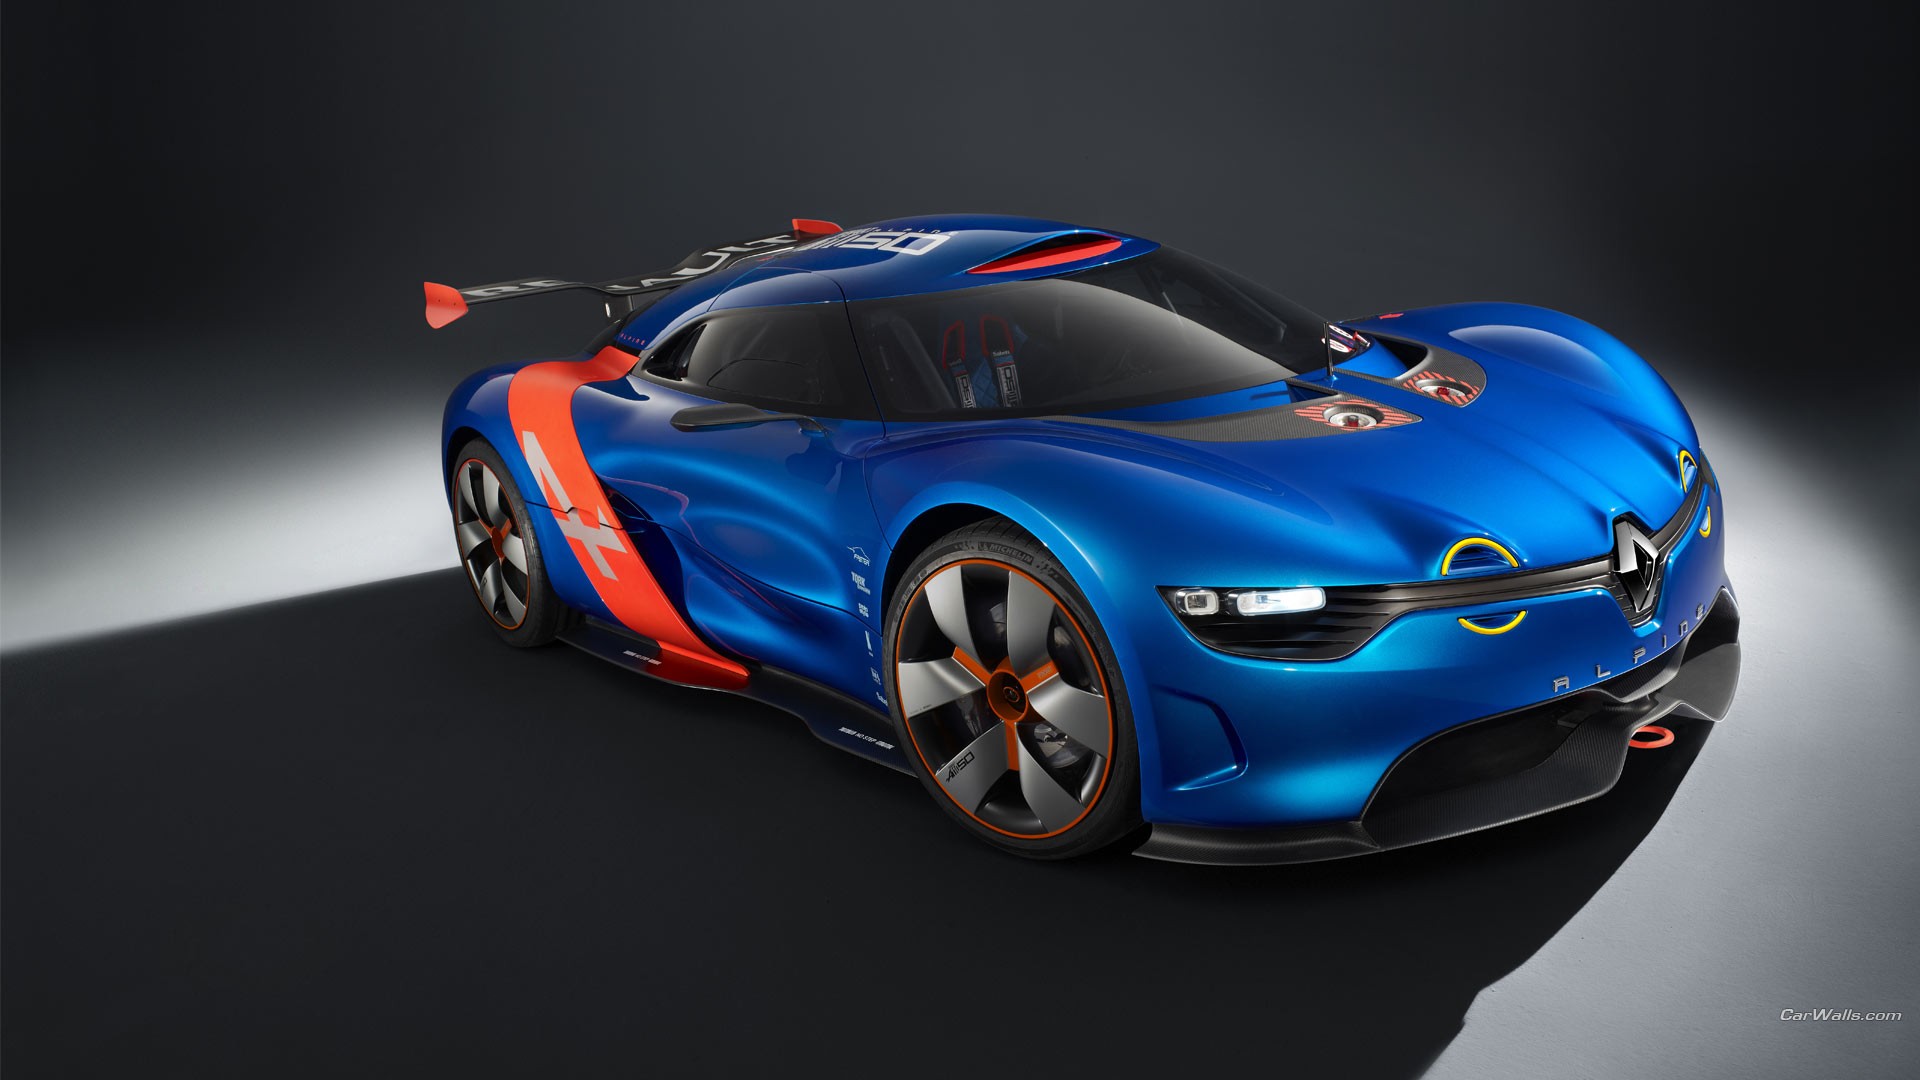 General 1920x1080 car Renault Alpine Renault vehicle blue cars French Cars Alpine A110-50 watermarked